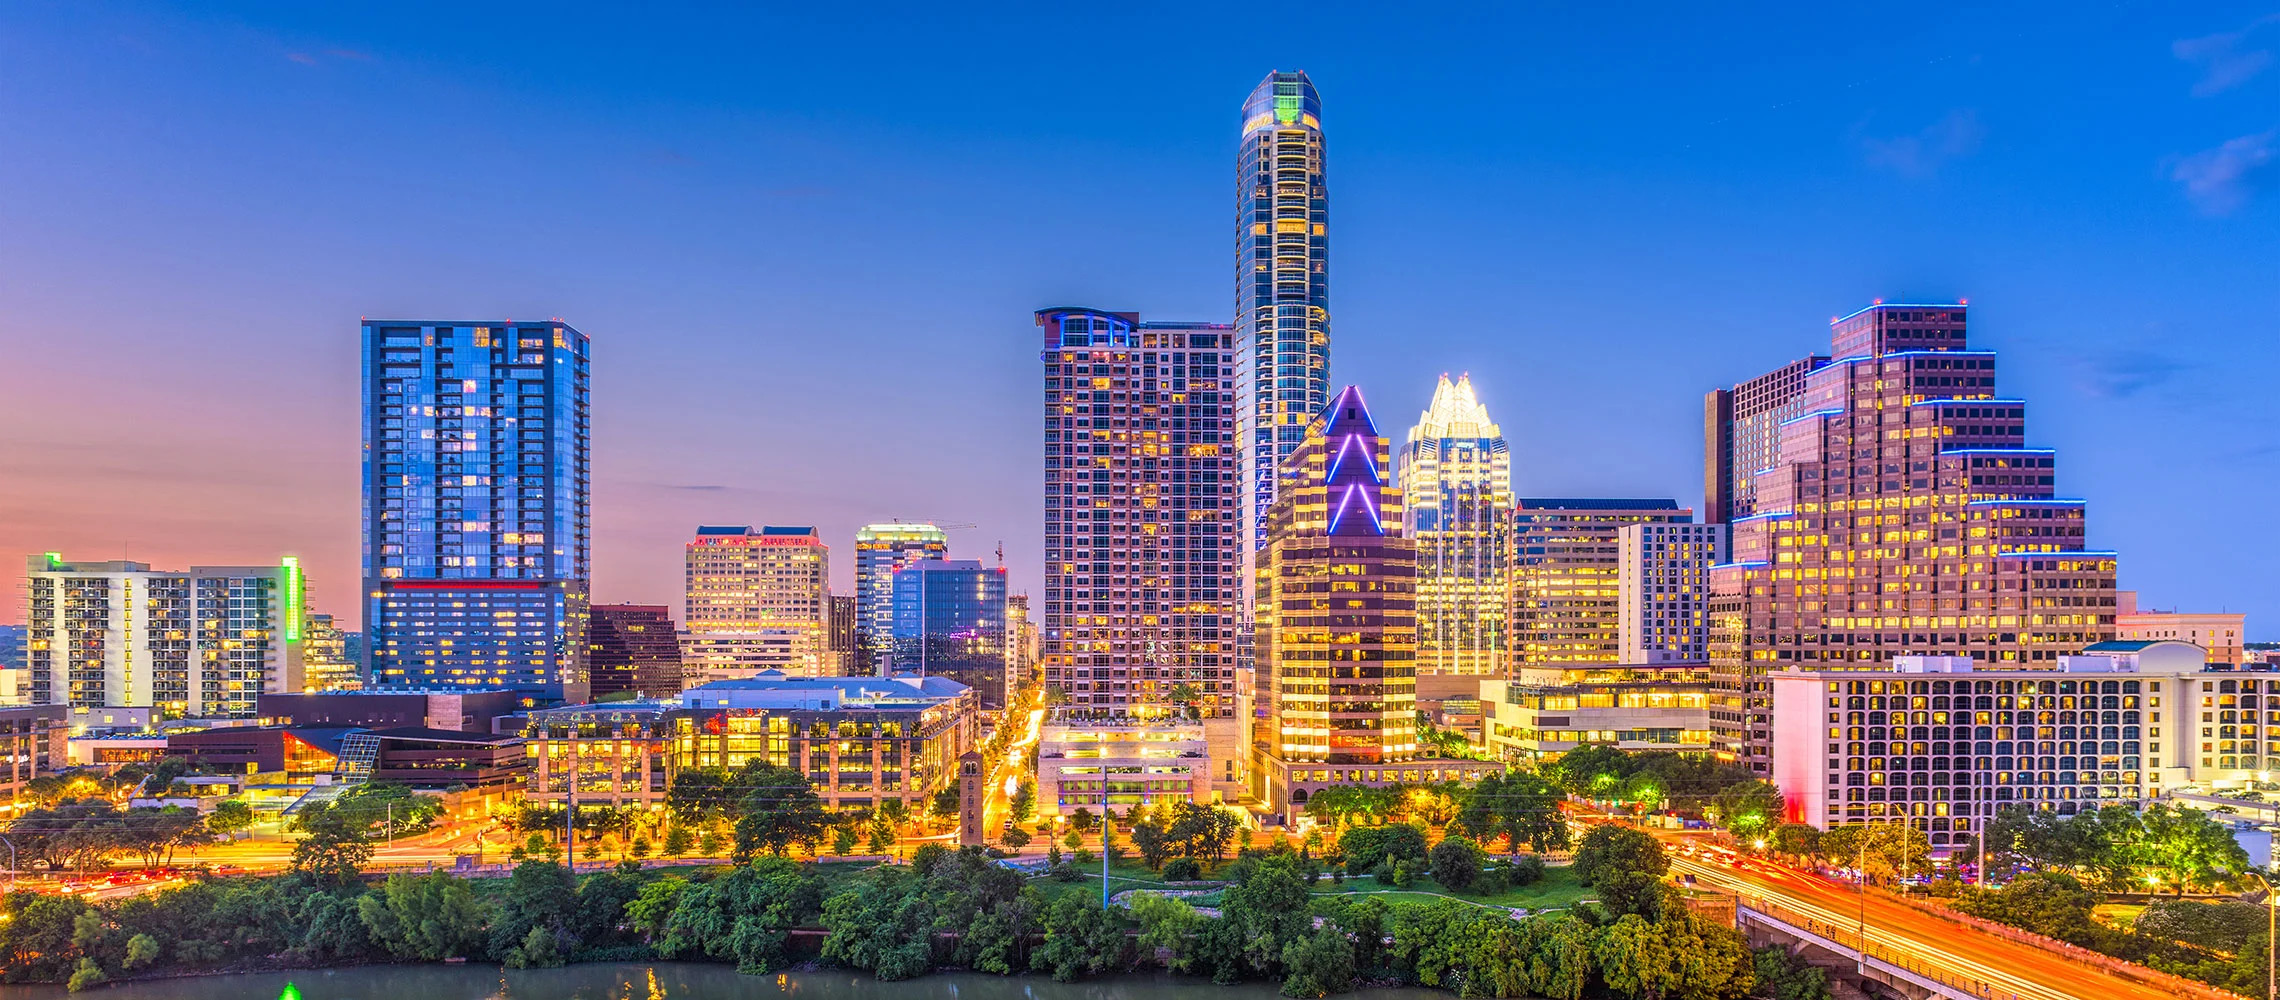 34-facts-about-austin-tx